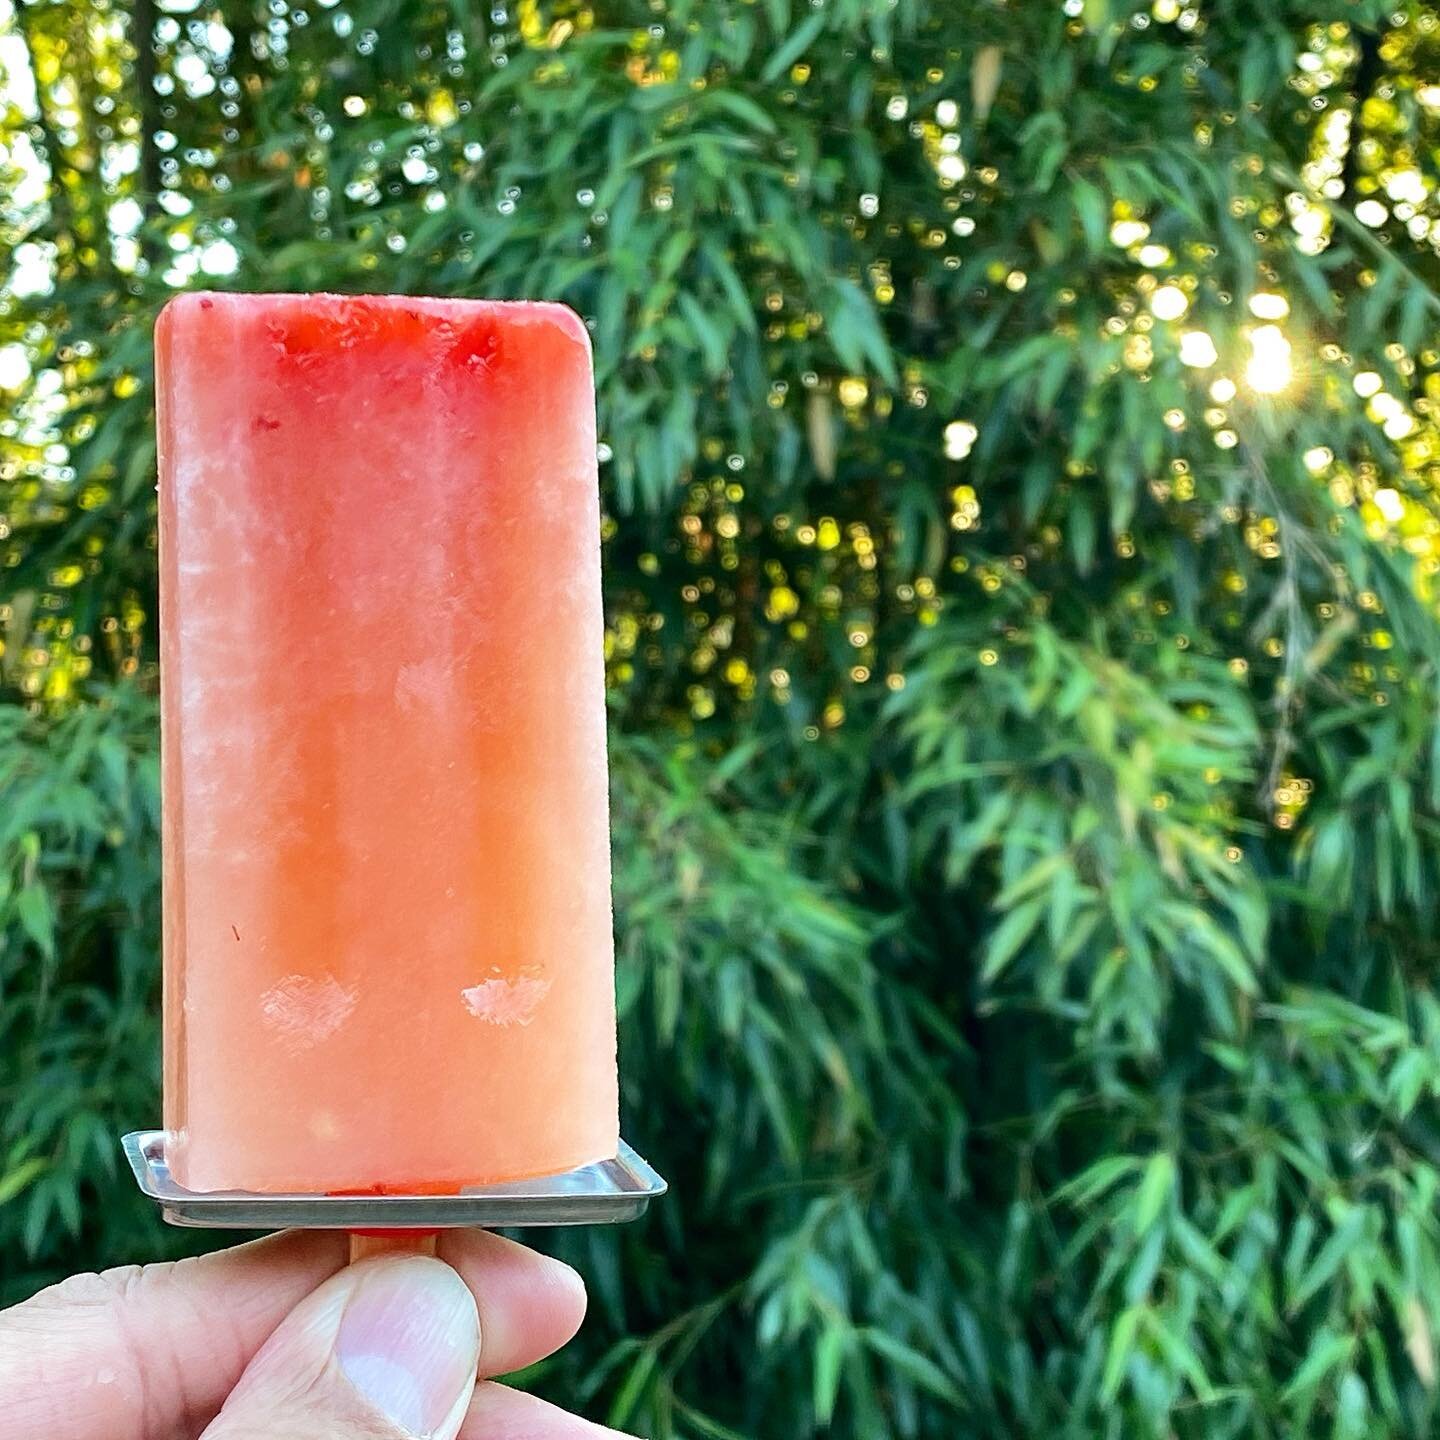 We have been busy little bees here at Sunfresh for the last couple of months, so we apologize for the radio silence! 
☀️
Check out these delicious popsicles we made during that heat wave. Want to make your own this Summer? Just grab your favorite jui